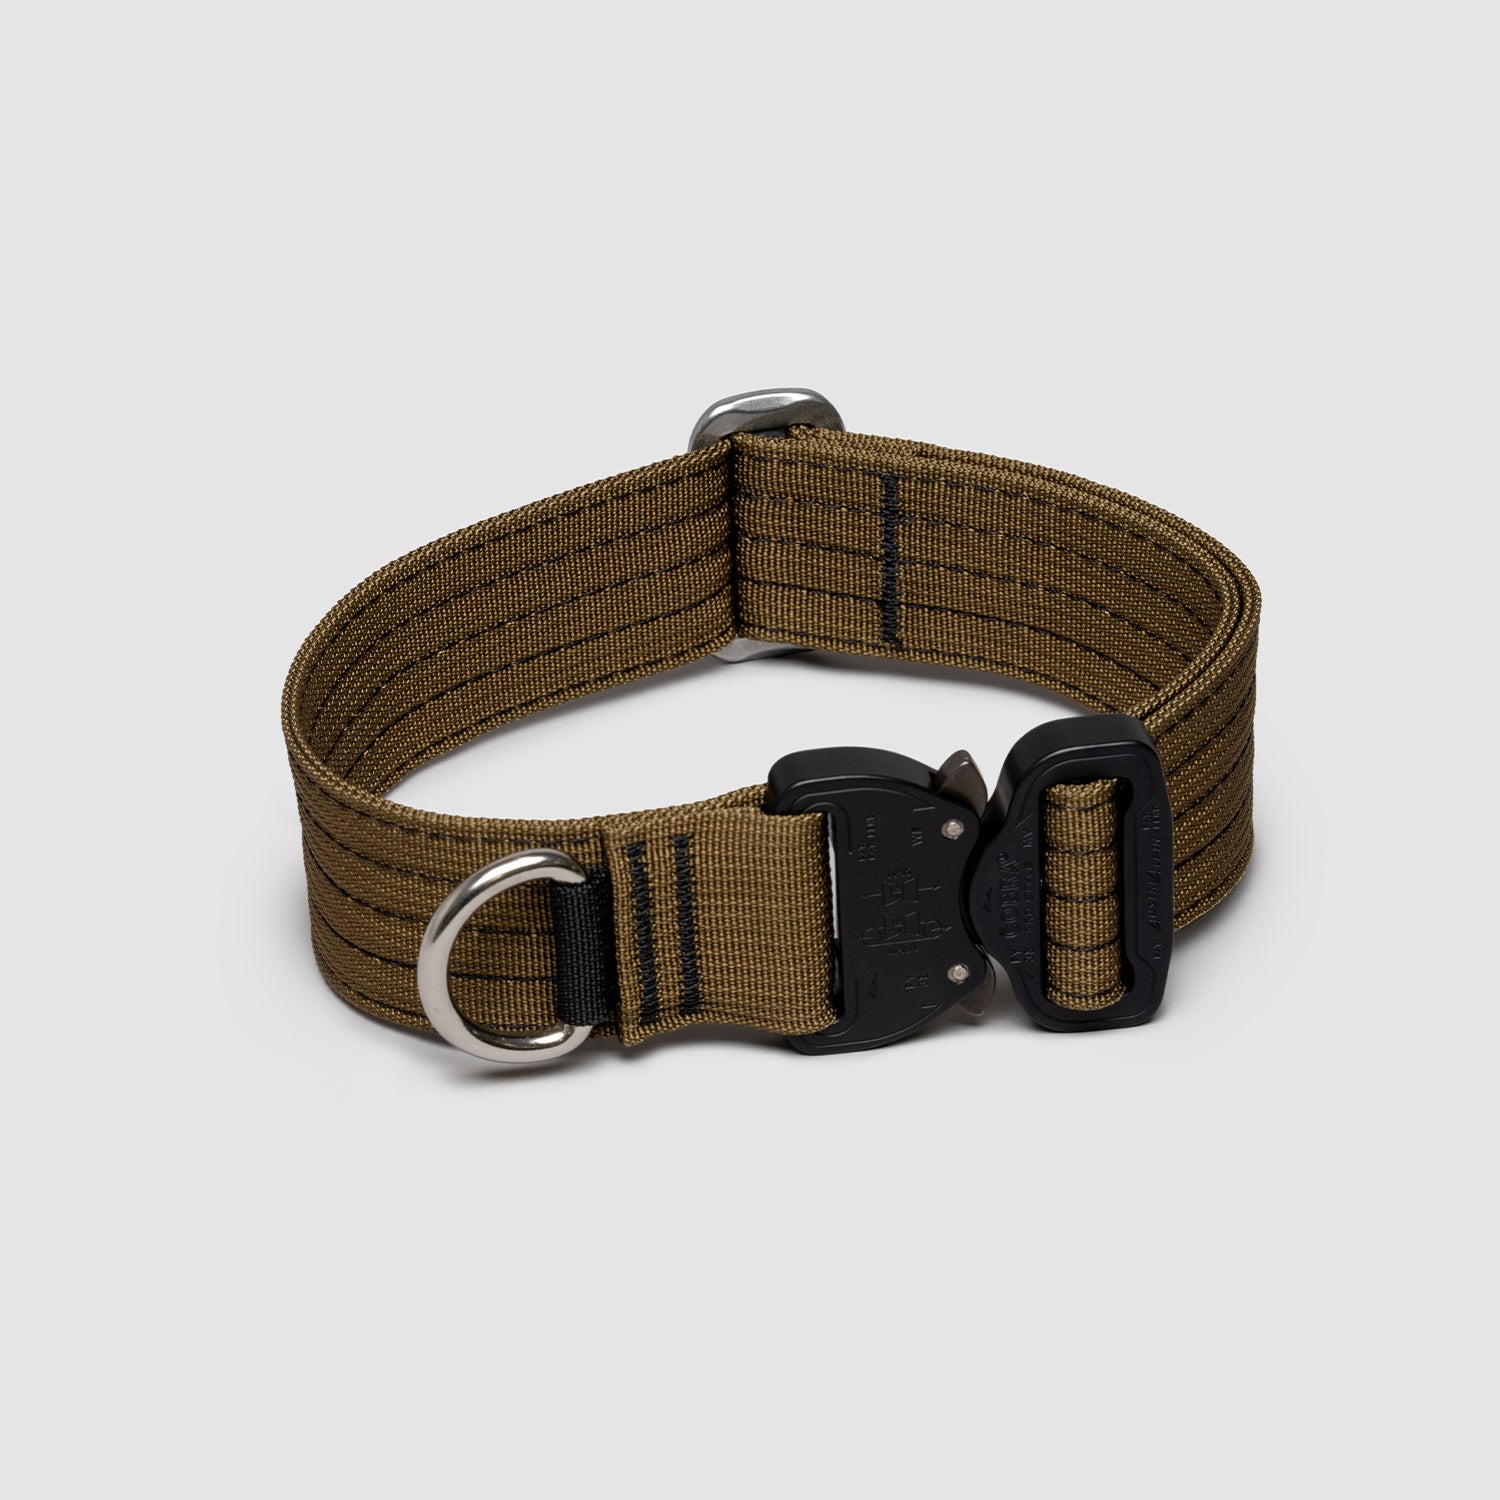 atlas pet company lifetime pro collar tactical lifetime warranty dog collar for working dogs